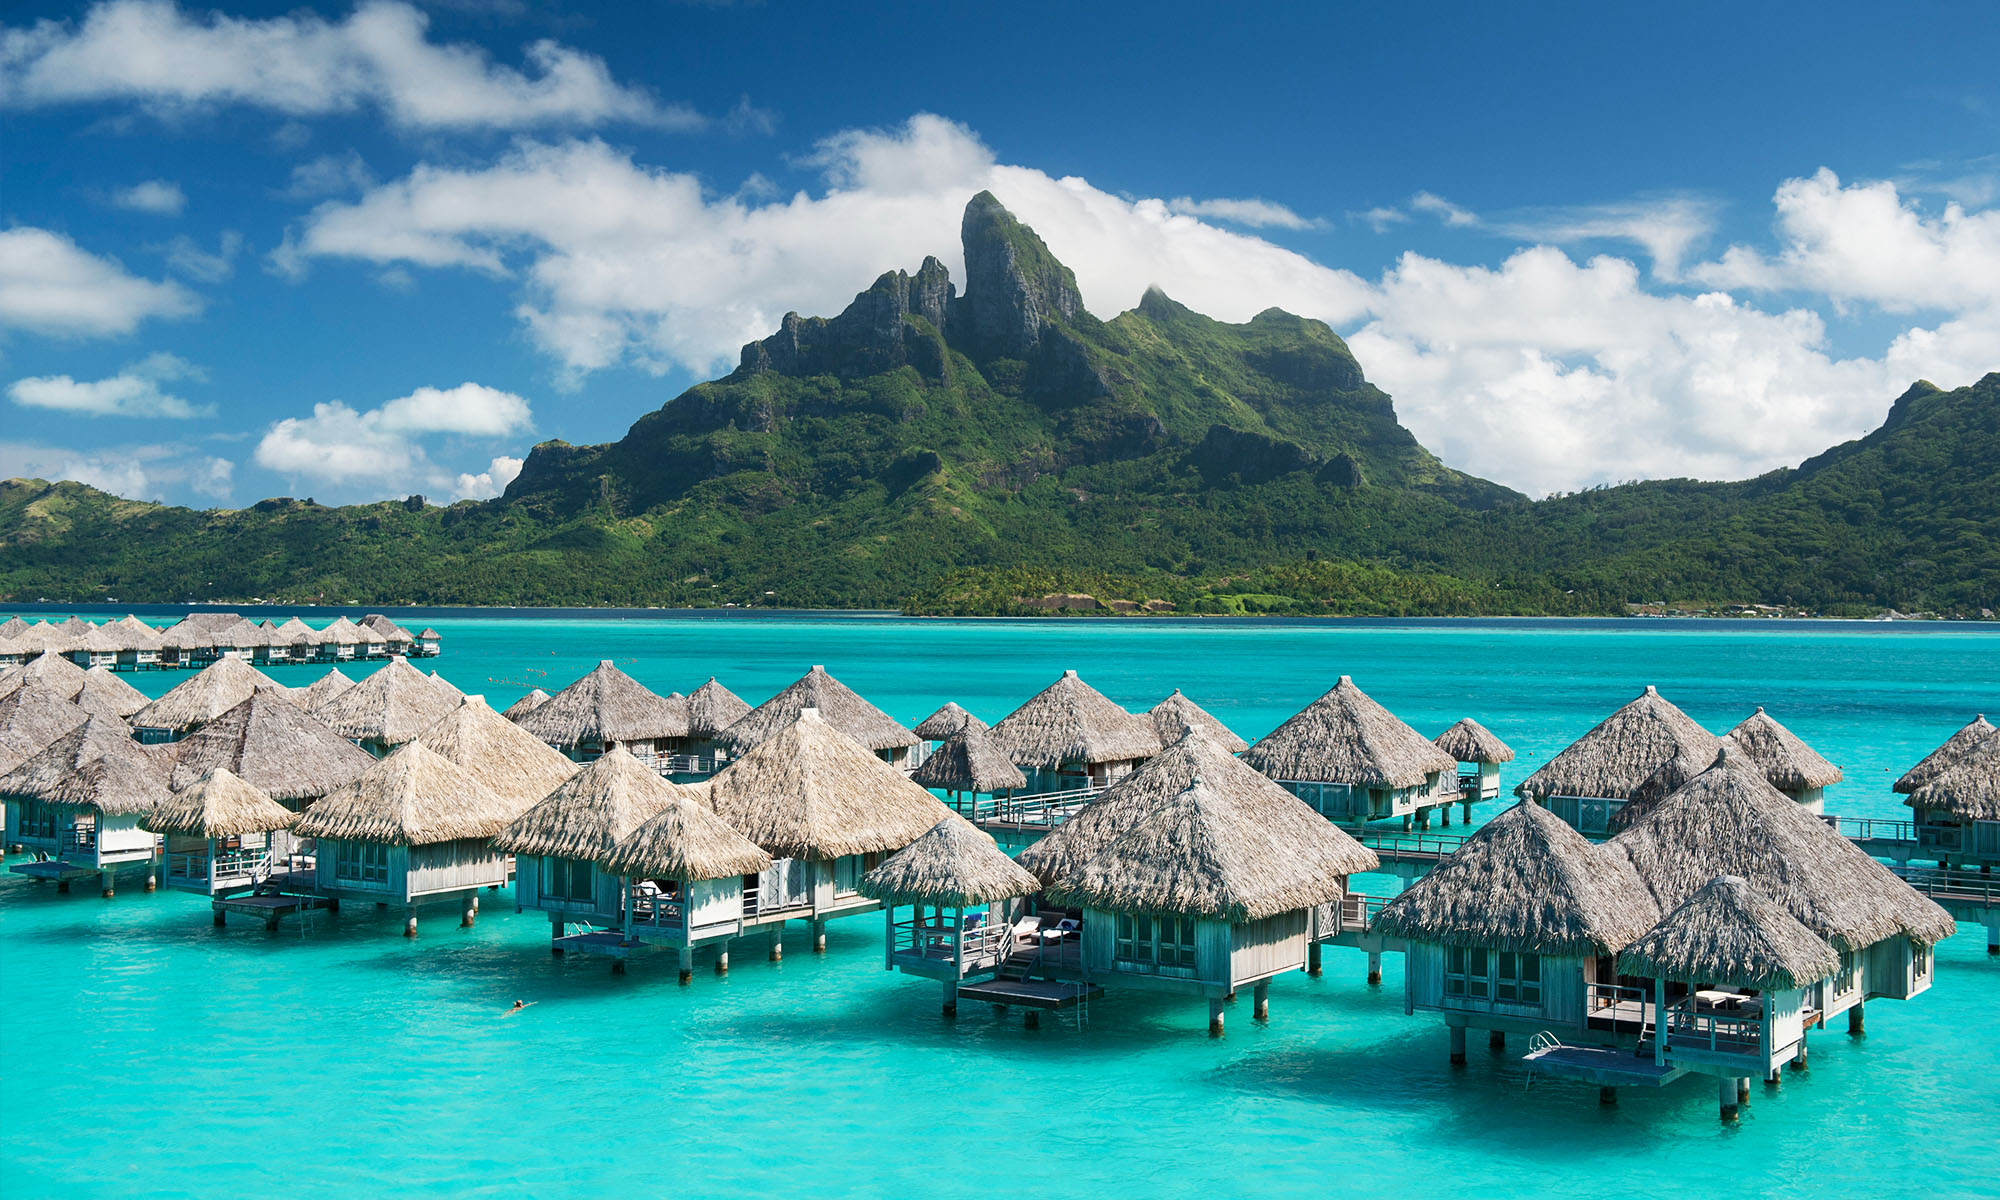 San Francisco to Tahiti French Polynesia $604 RT Nonstop Airfares on United Airlines / French Bee Airlines (Limited Travel September 2022)